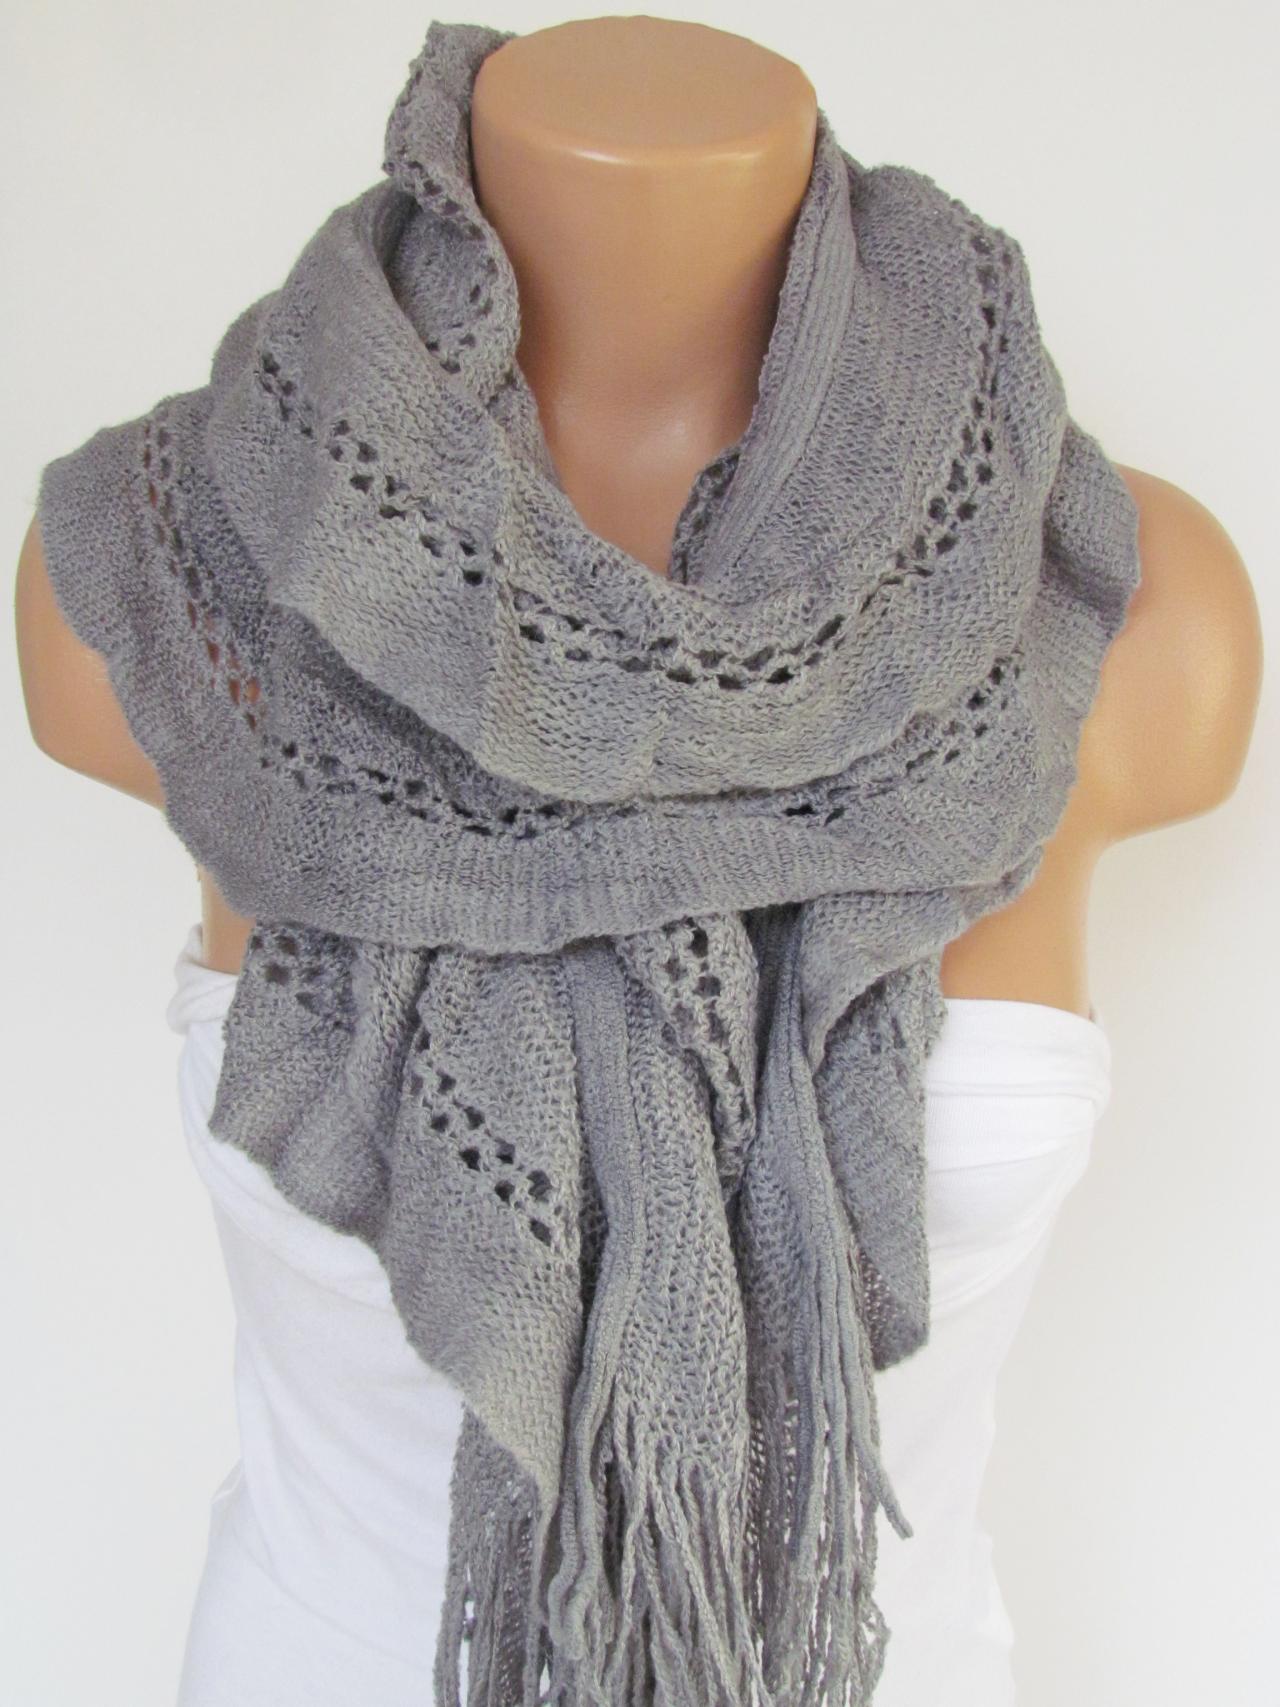 Gray Knitted Fabric Scarf - Shawl Scarf - Neck Warmer, Winter Accessories, Fall Fashion, Holiday Accossories,Gift For Valentines